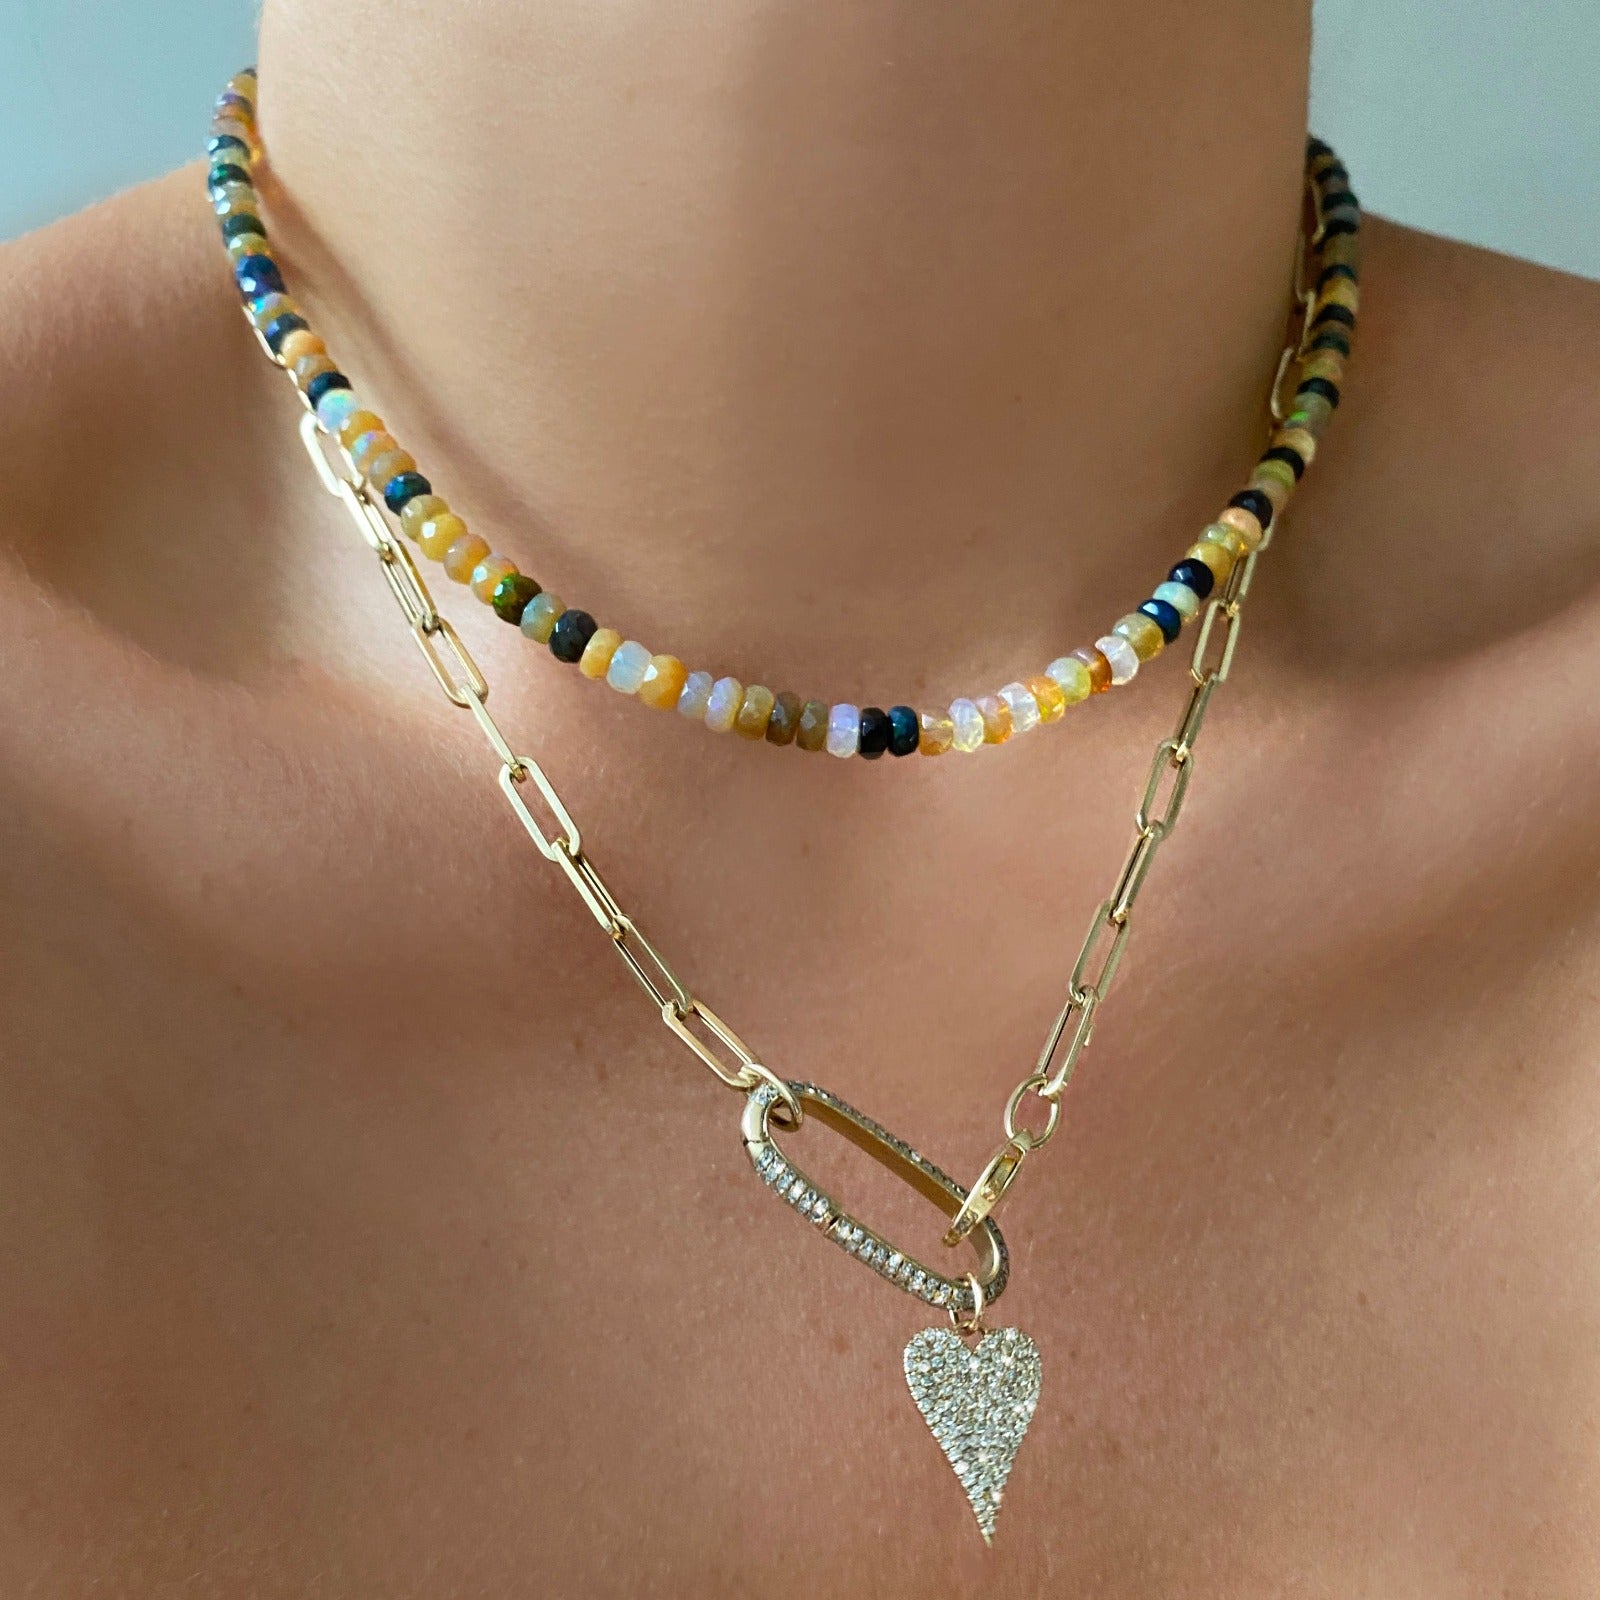 Shimmering beaded necklace made of faceted opals in shades of yellow, white, clear, brown, and black on a gold linking ovals clasp. Styled on a neck layered with the paperclip chain necklace, pave oval charm lock, and medium pave diamond heart.